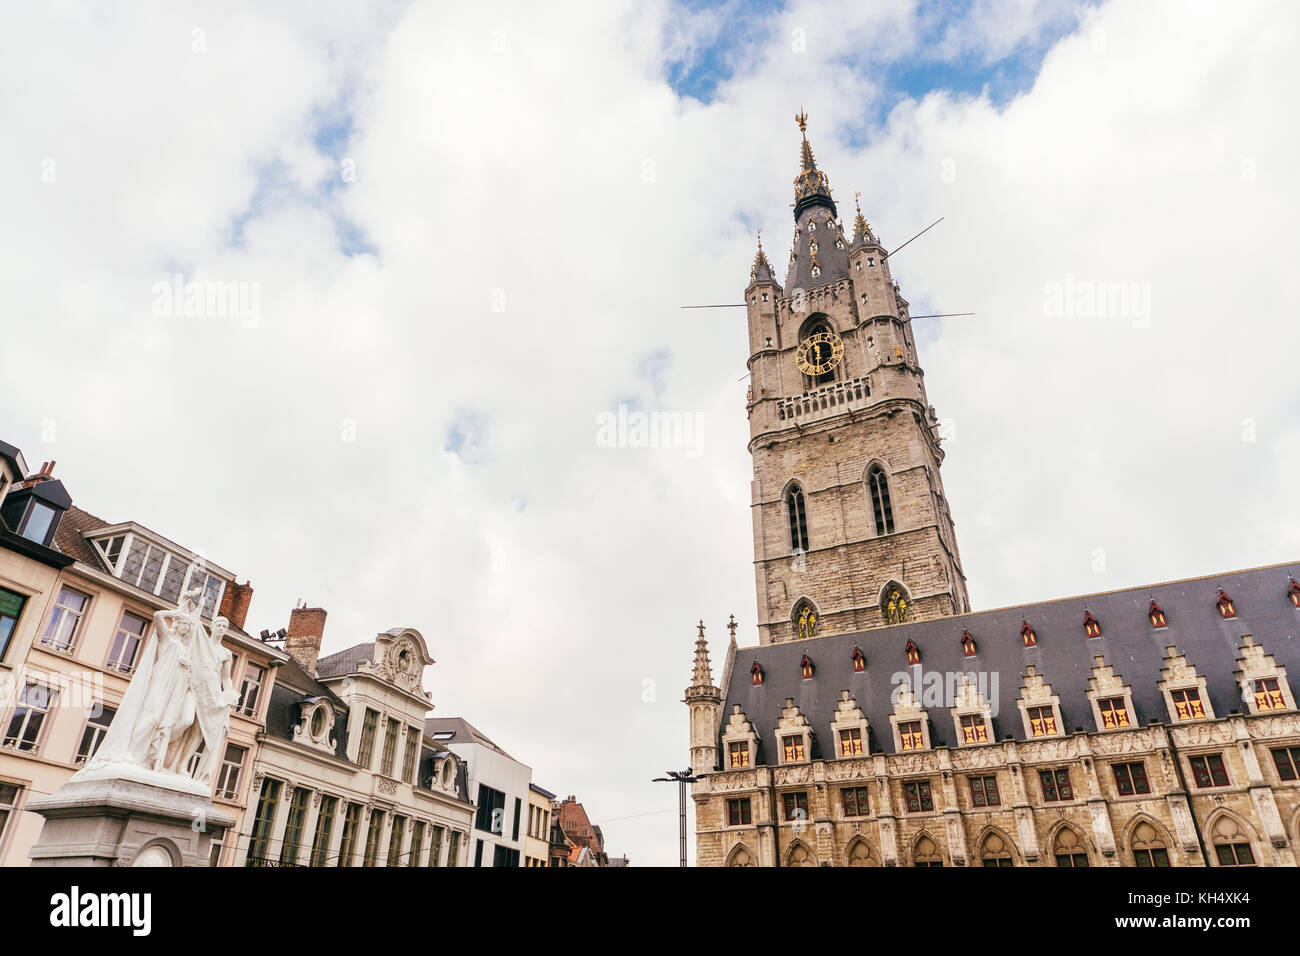 GHENT, BELGIUM - November, 2017: Architecture of Ghent city center. Ghent is a city and a municipality located in the Flemish region of Belgium, capit Stock Photo